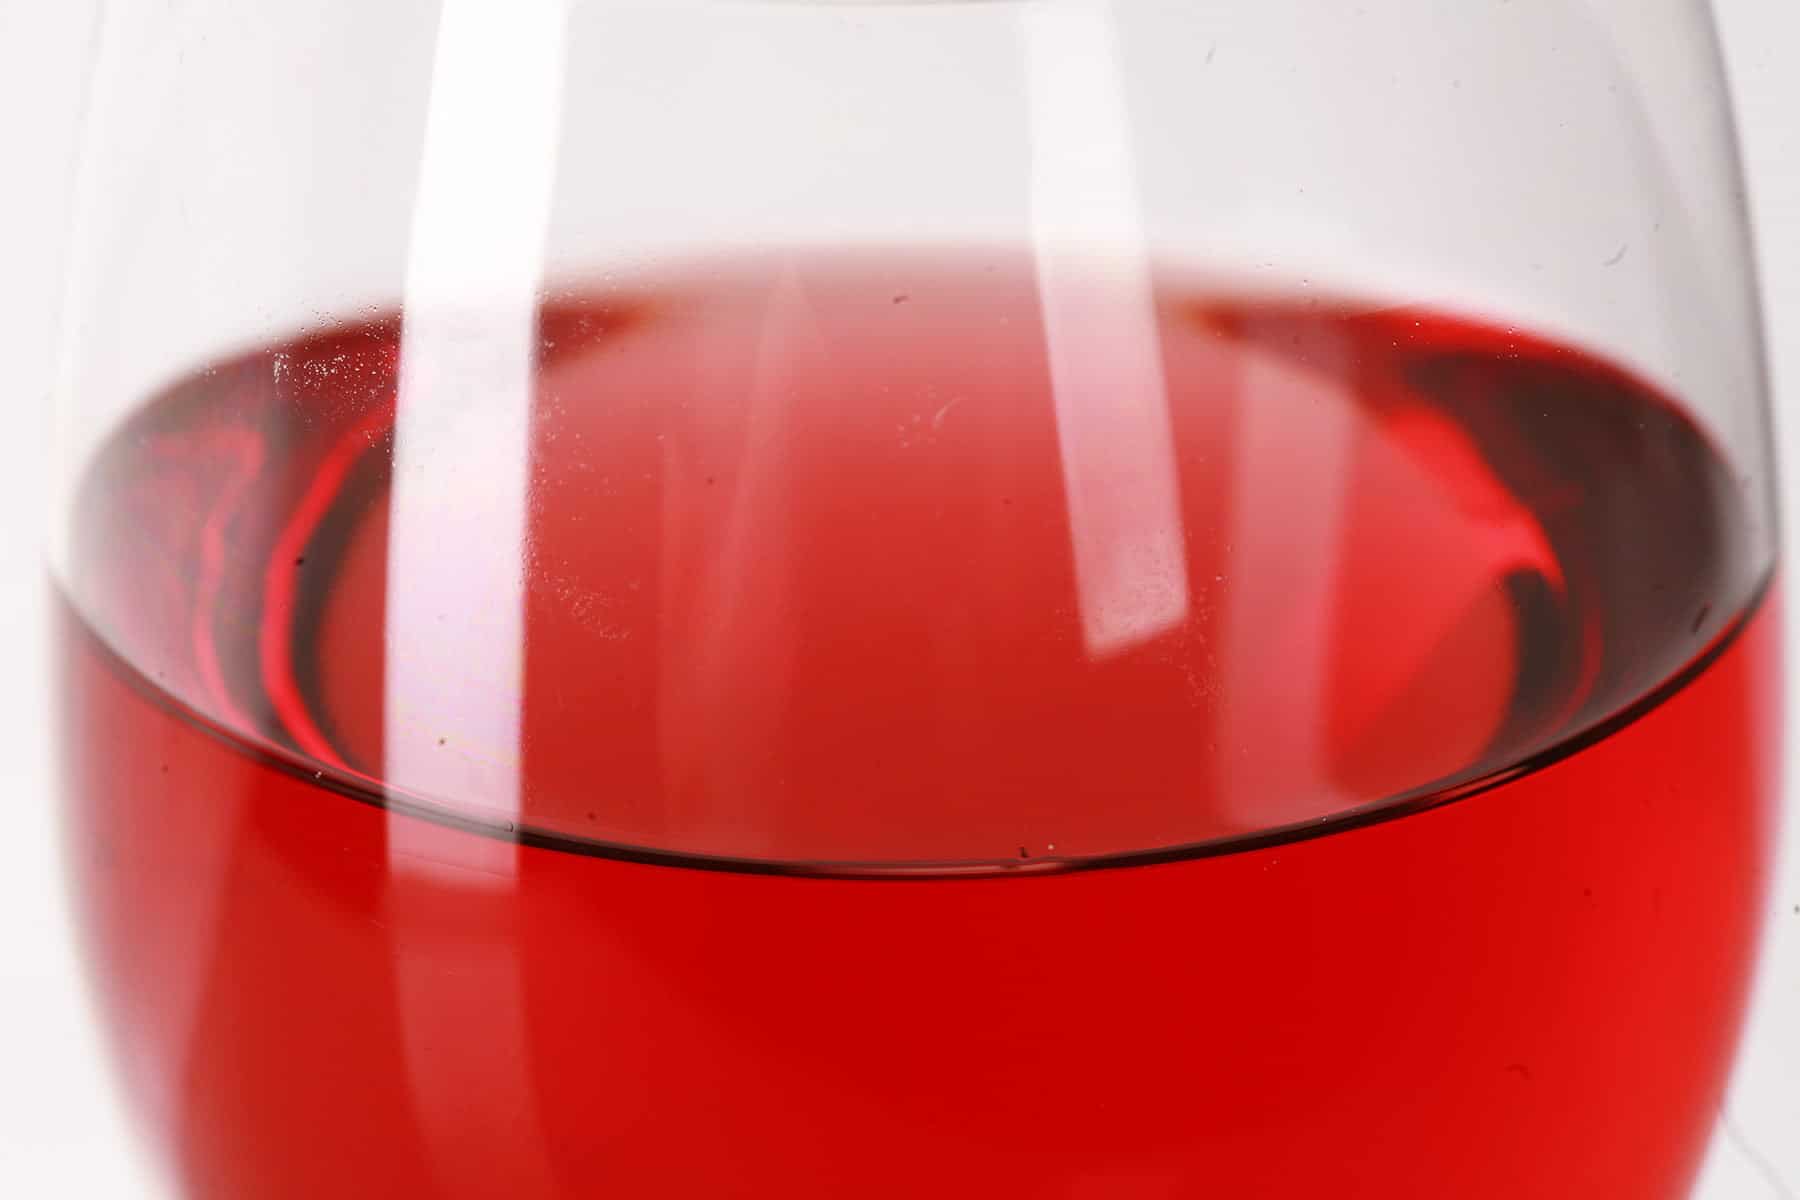 Close up photo of a glass of brilliantly red cranberry wine, in front of a white background.